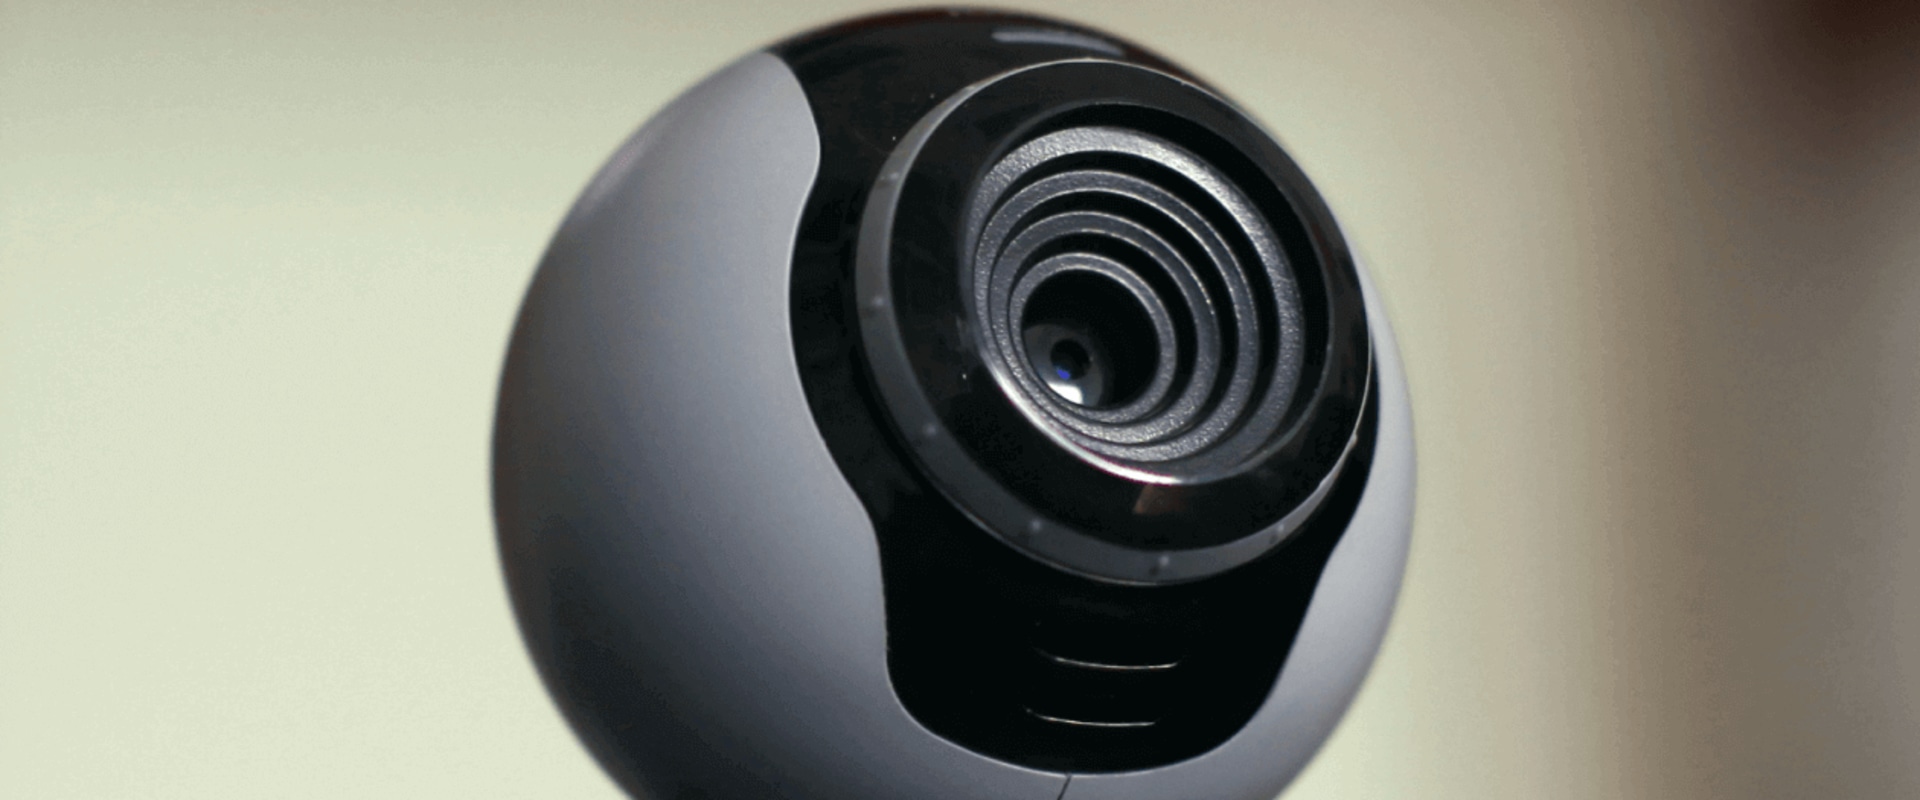 Streaming Webcams: An Overview